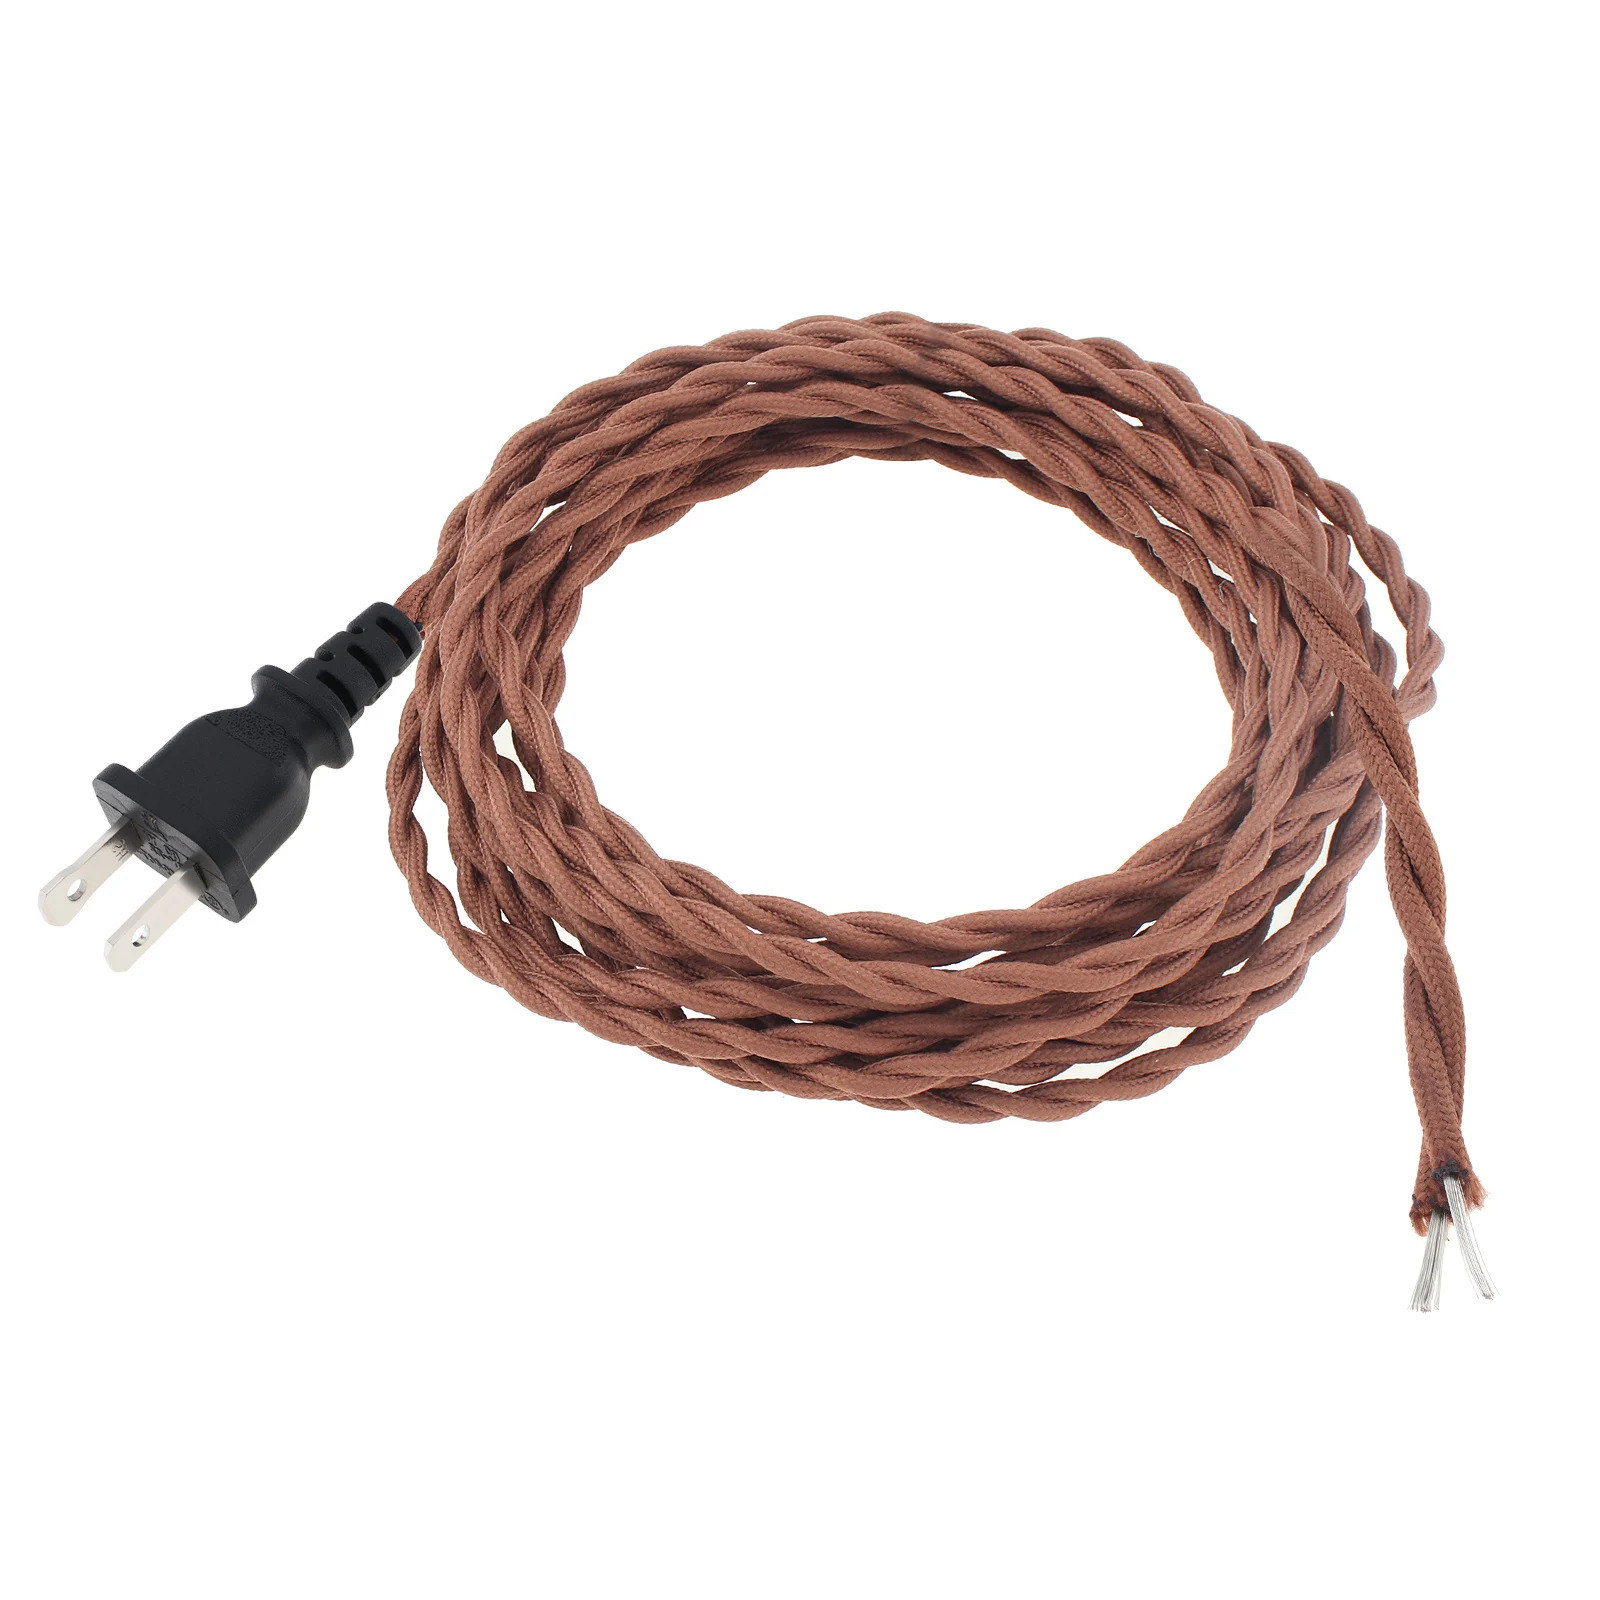 3.6M/12FT Twisted Cloth Covered Lamp Cord Replacement Extension Industrial for DIY Projects Retro Lamp with US End Plug swimming pool cleaning equipment with brush 12ft 34ft cleaner